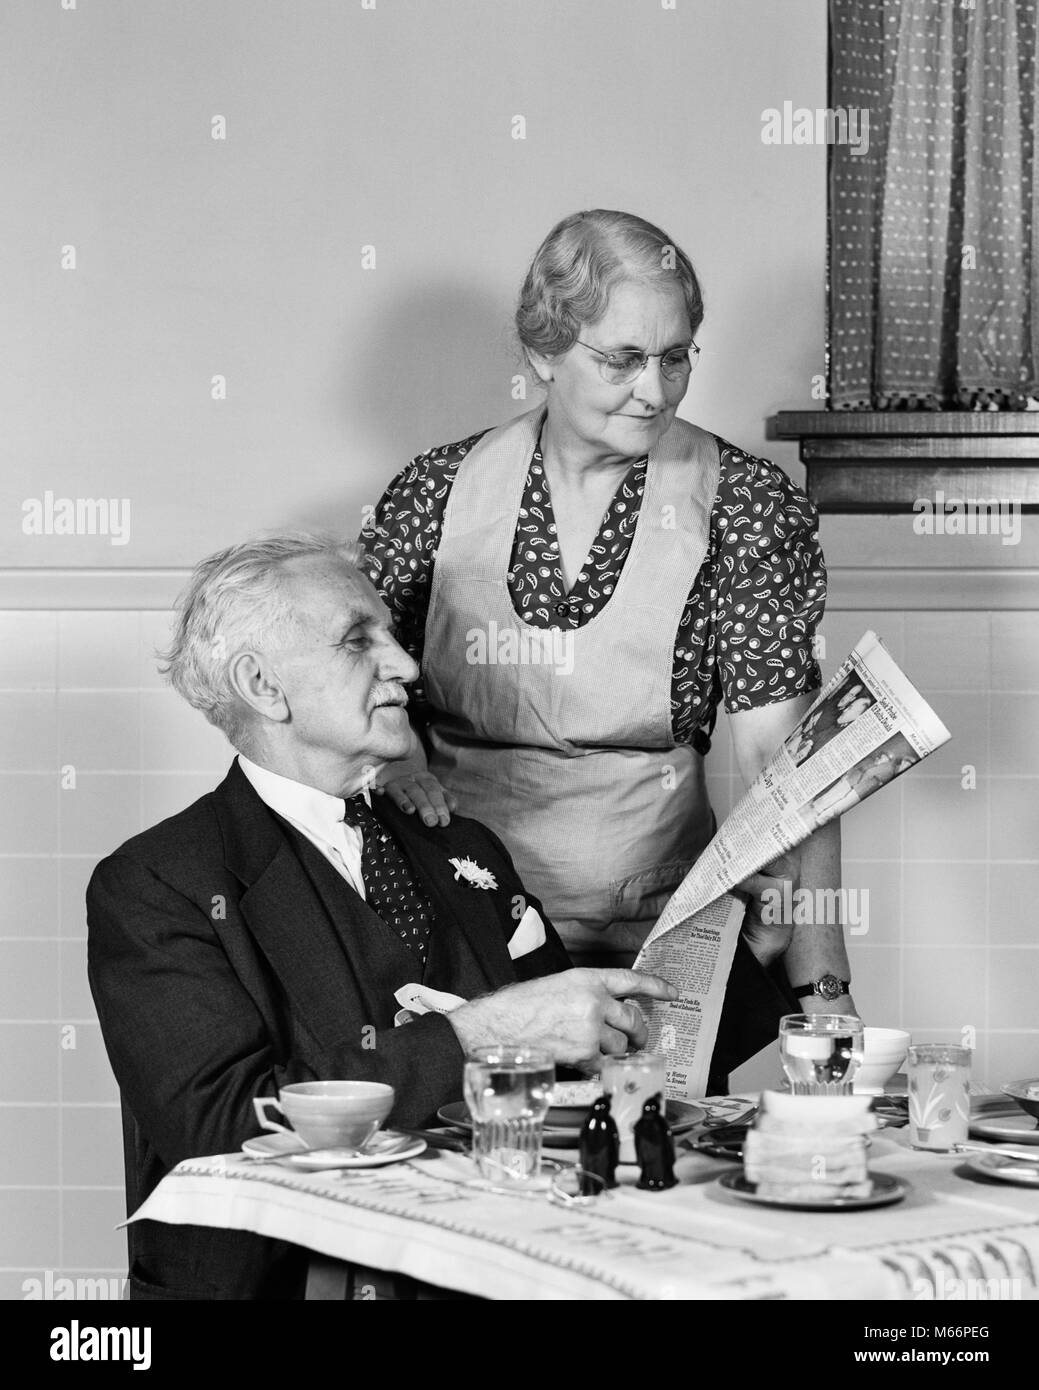 1940s ELDERLY COUPLE MAN WOMAN IN KITCHEN MAN SITTING AT TABLE WOMAN LOOKING OVER HIS SHOULDER READING NEWSPAPER - r13244 HAR001 HARS CAUCASIAN PLEASED JOY ELDER FEMALES MARRIED STUDIO SHOT SPOUSE HUSBANDS HEALTHINESS HOME LIFE COPY SPACE FRIENDSHIP HALF-LENGTH LADIES CARING NEWSPAPERS COUPLES INDOORS RETIREMENT SENIOR MAN SENIOR ADULT NOSTALGIA MORNING TOGETHERNESS SENIOR WOMAN HOMEMAKER WIVES HOMEMAKERS OLDSTERS CHEERFUL OLDSTER HIS HOUSEWIVES SMILES ELDERS JOYFUL 70s ADULT ELDERLY MAN 80-PLUS ADULT ELDERLY WOMAN MALES B&W BLACK AND WHITE CAUCASIAN ETHNICITY HOME MAKER HOUSE WIFE HOUSEKEEPER Stock Photo